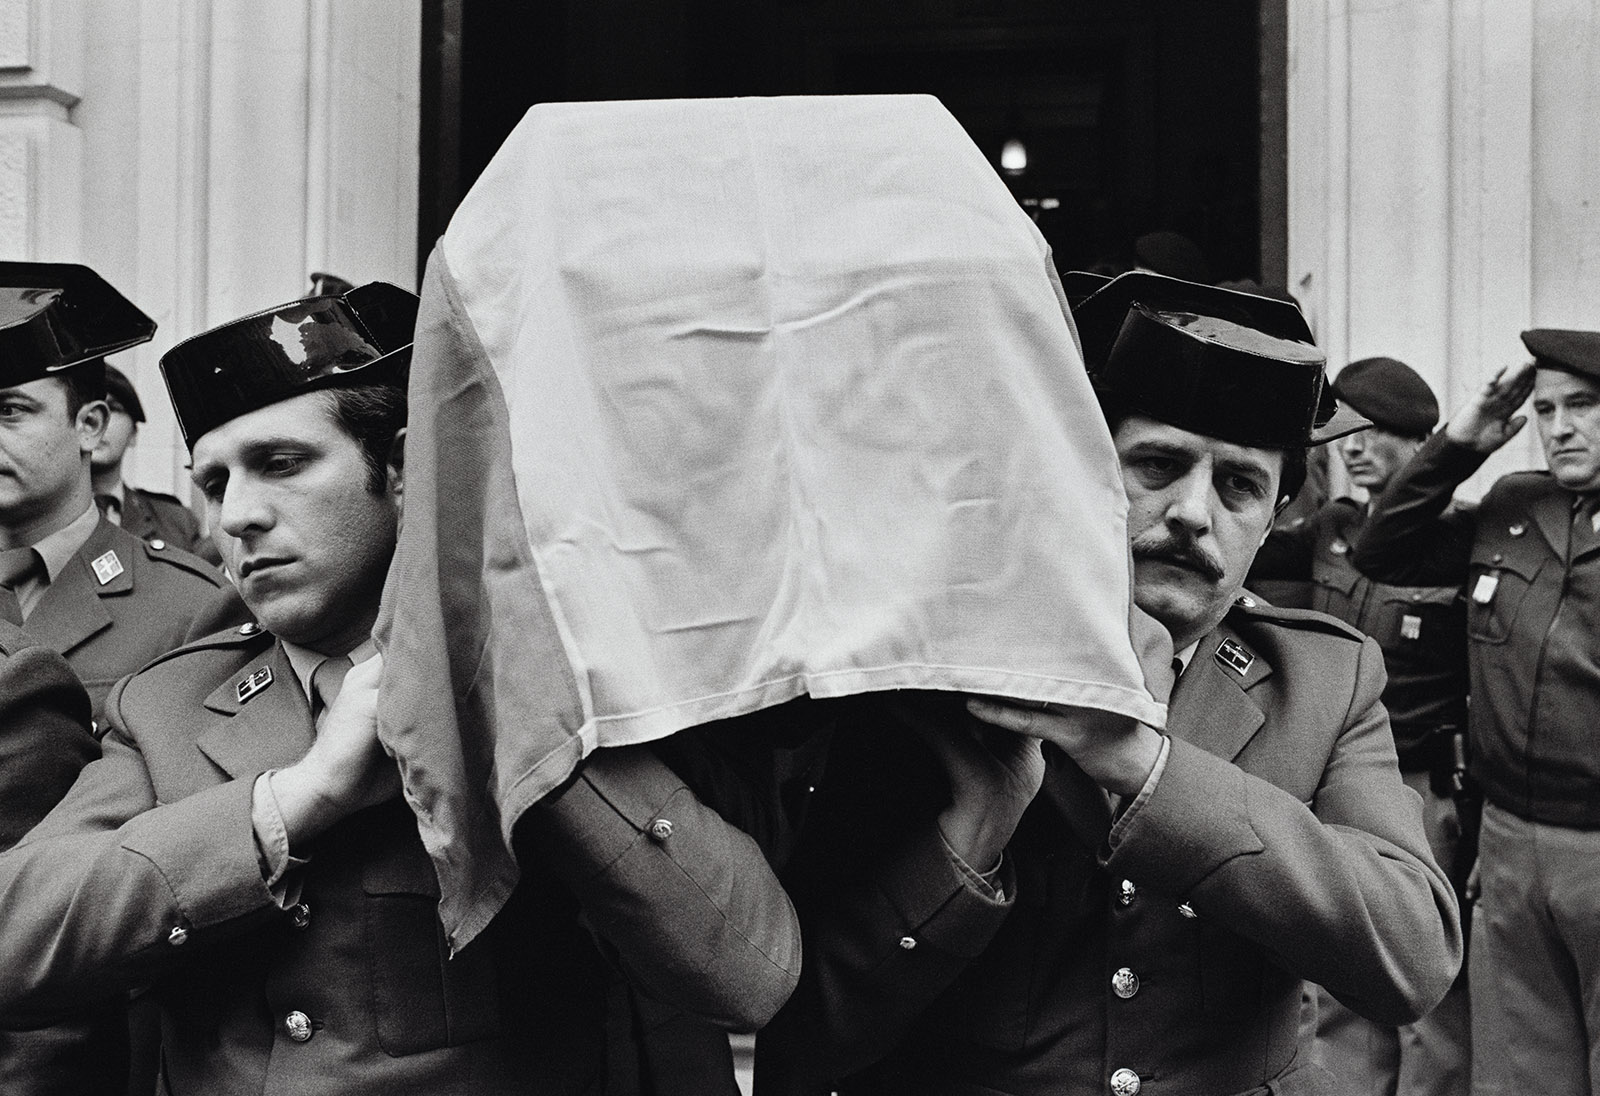 The funeral of three Guardia Civil police officers killed by the Basque separatist group ETA, Spain (date unknown, likely mid to late 1970s)